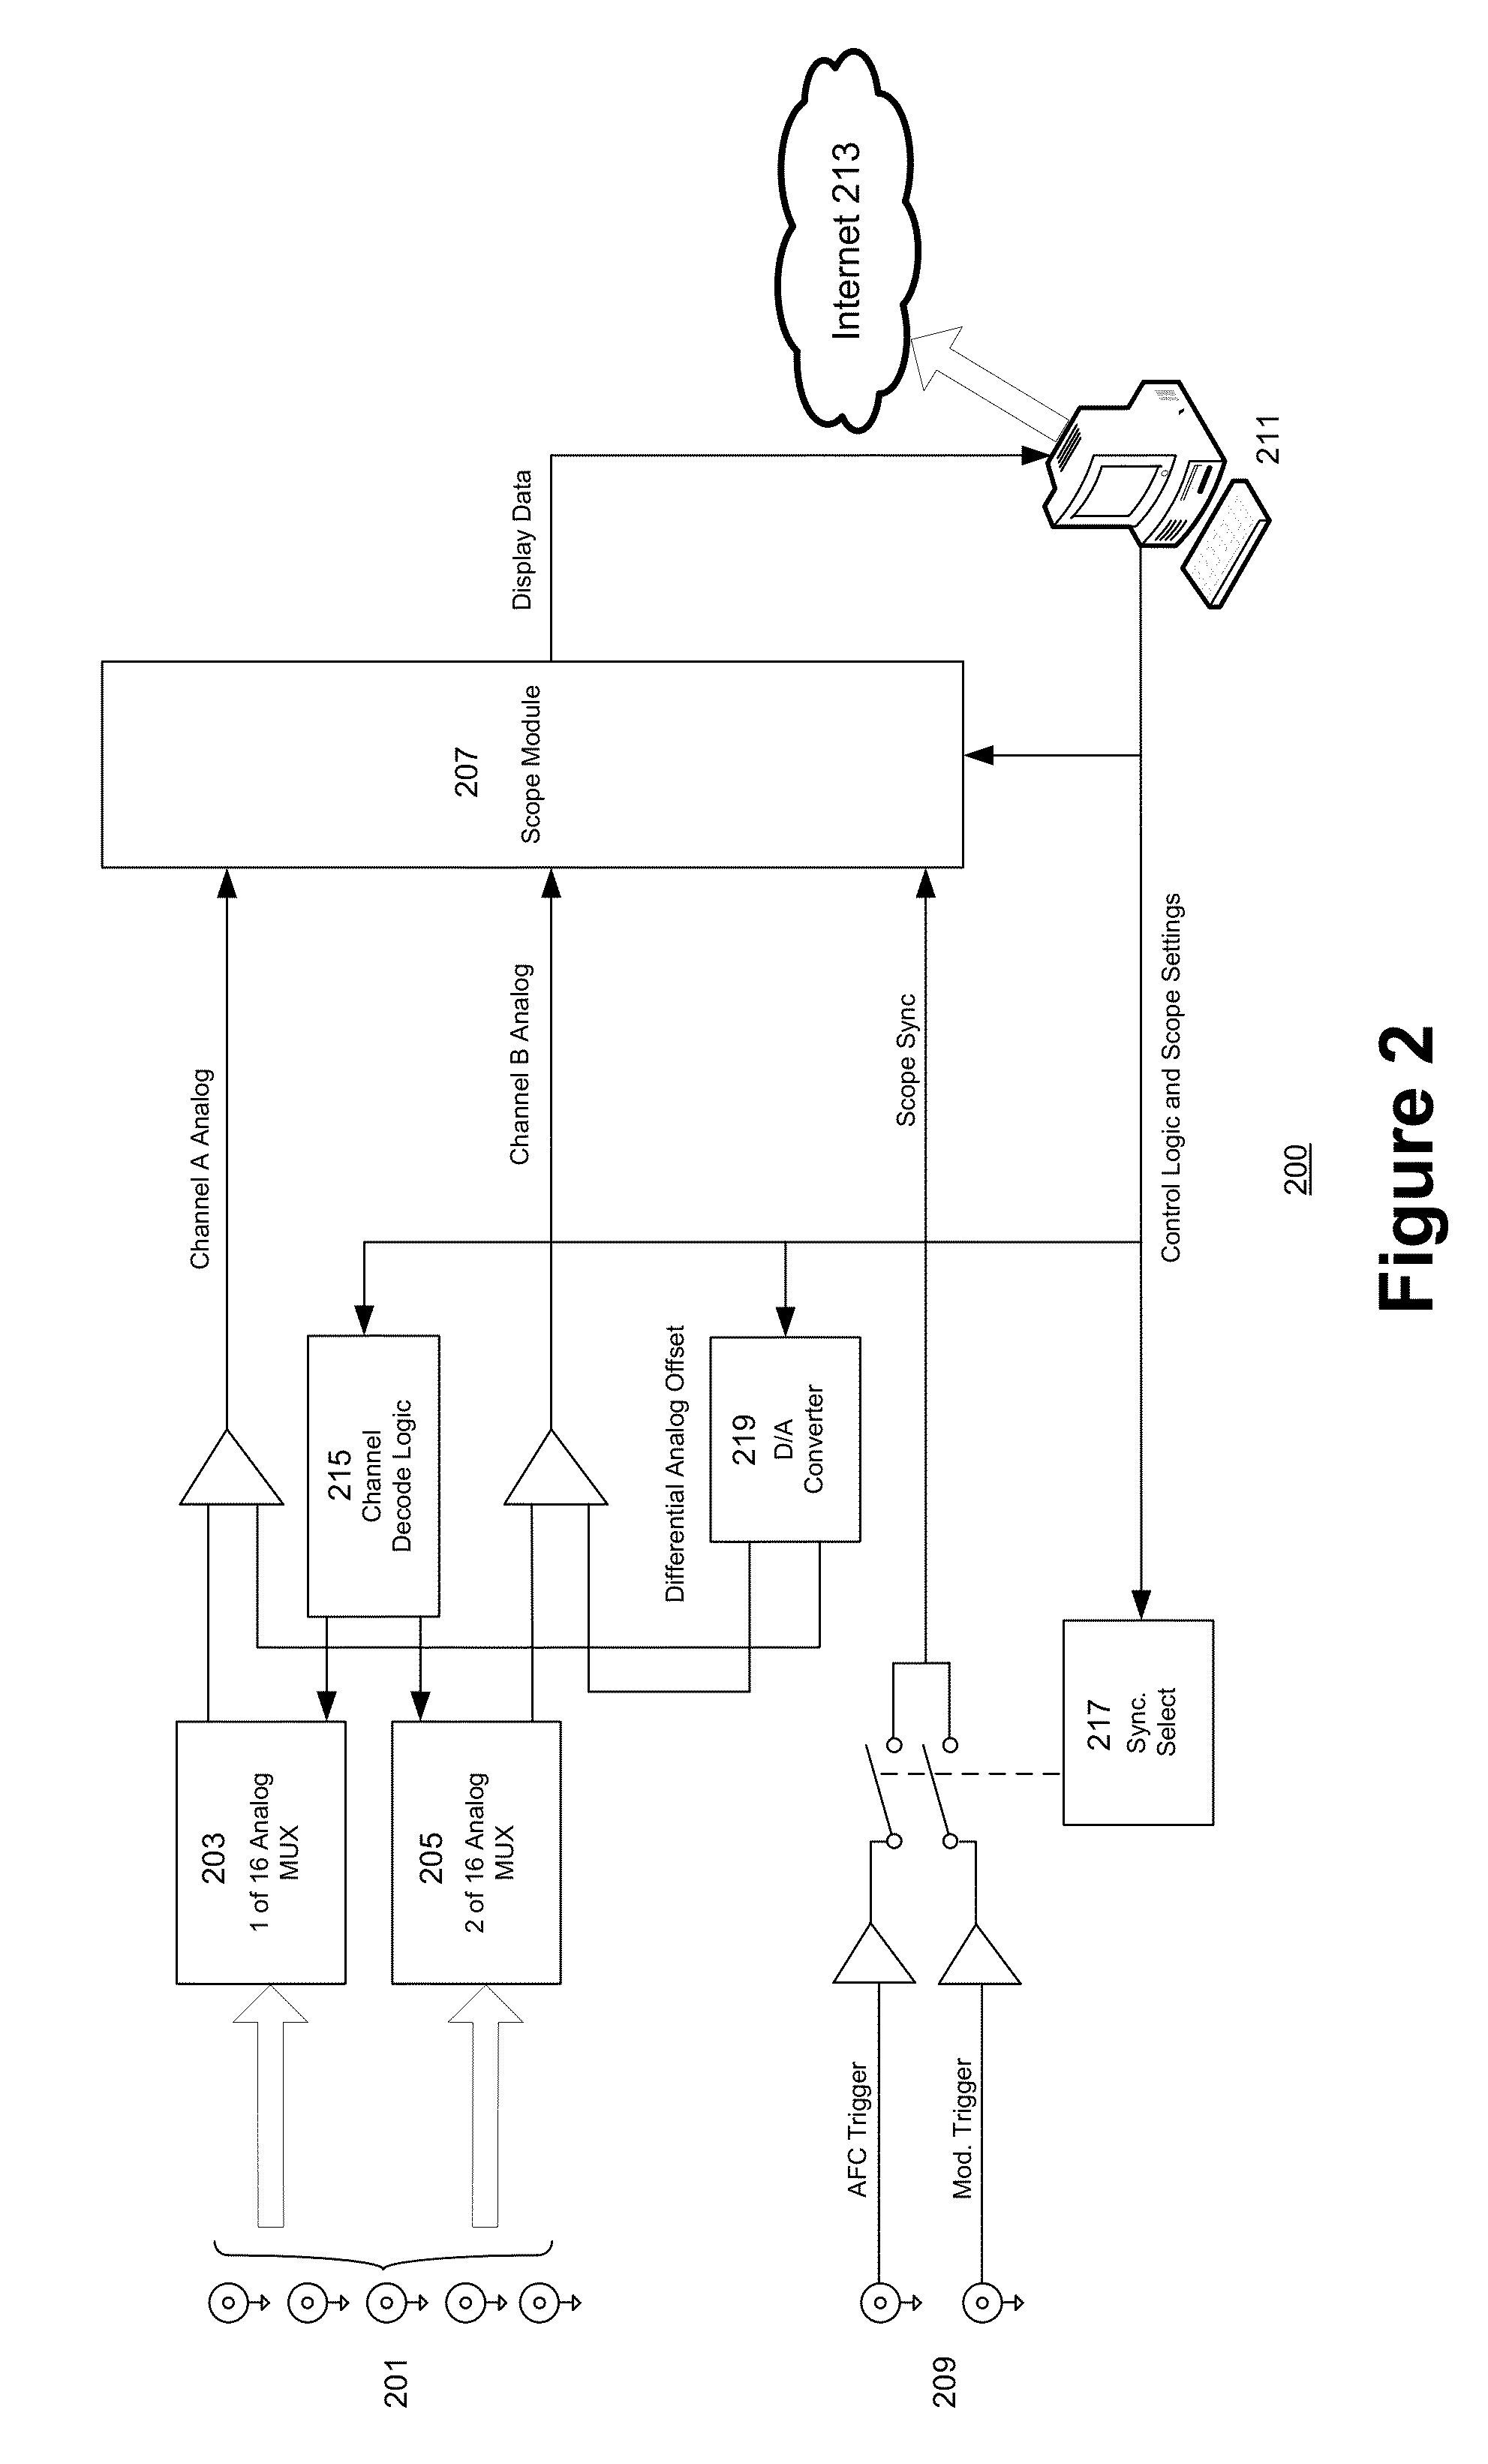 Medical linear accelerator signal analyzer and display device